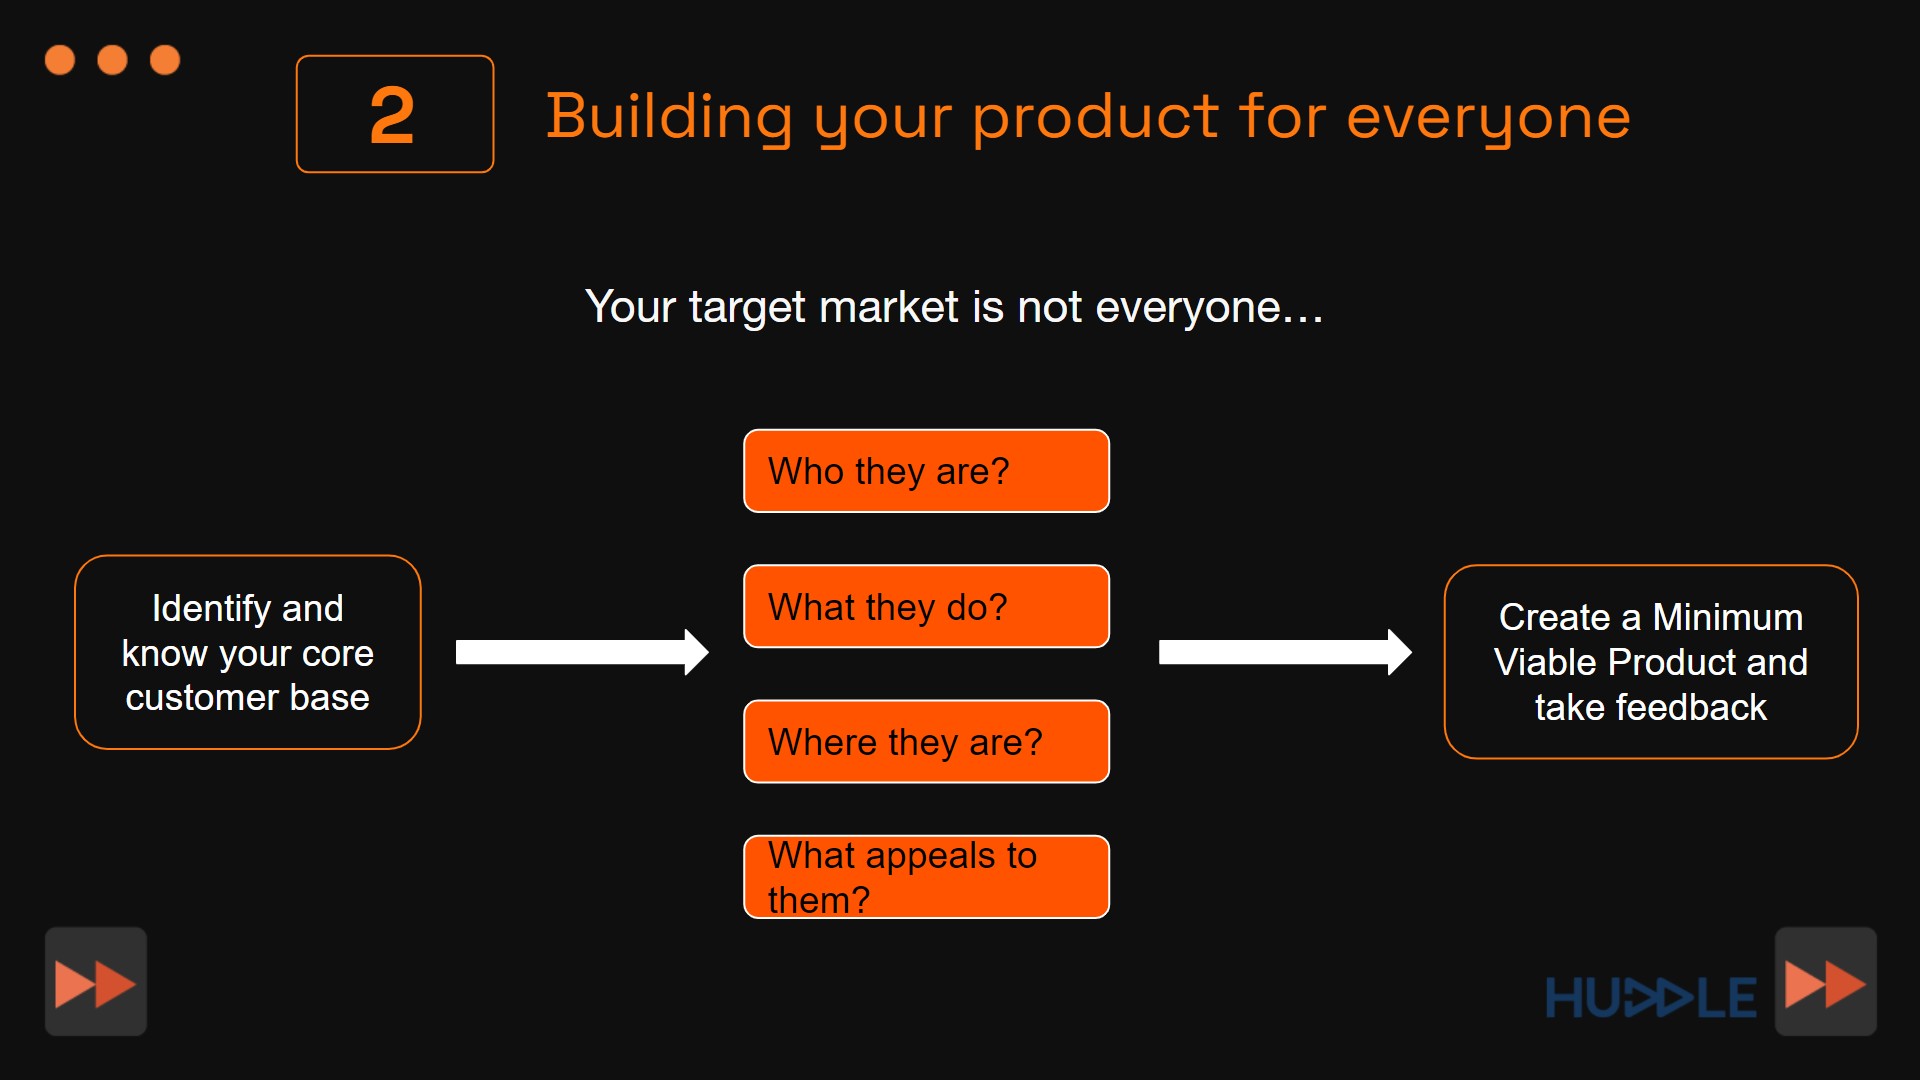 2. Building Your Product For Everyone